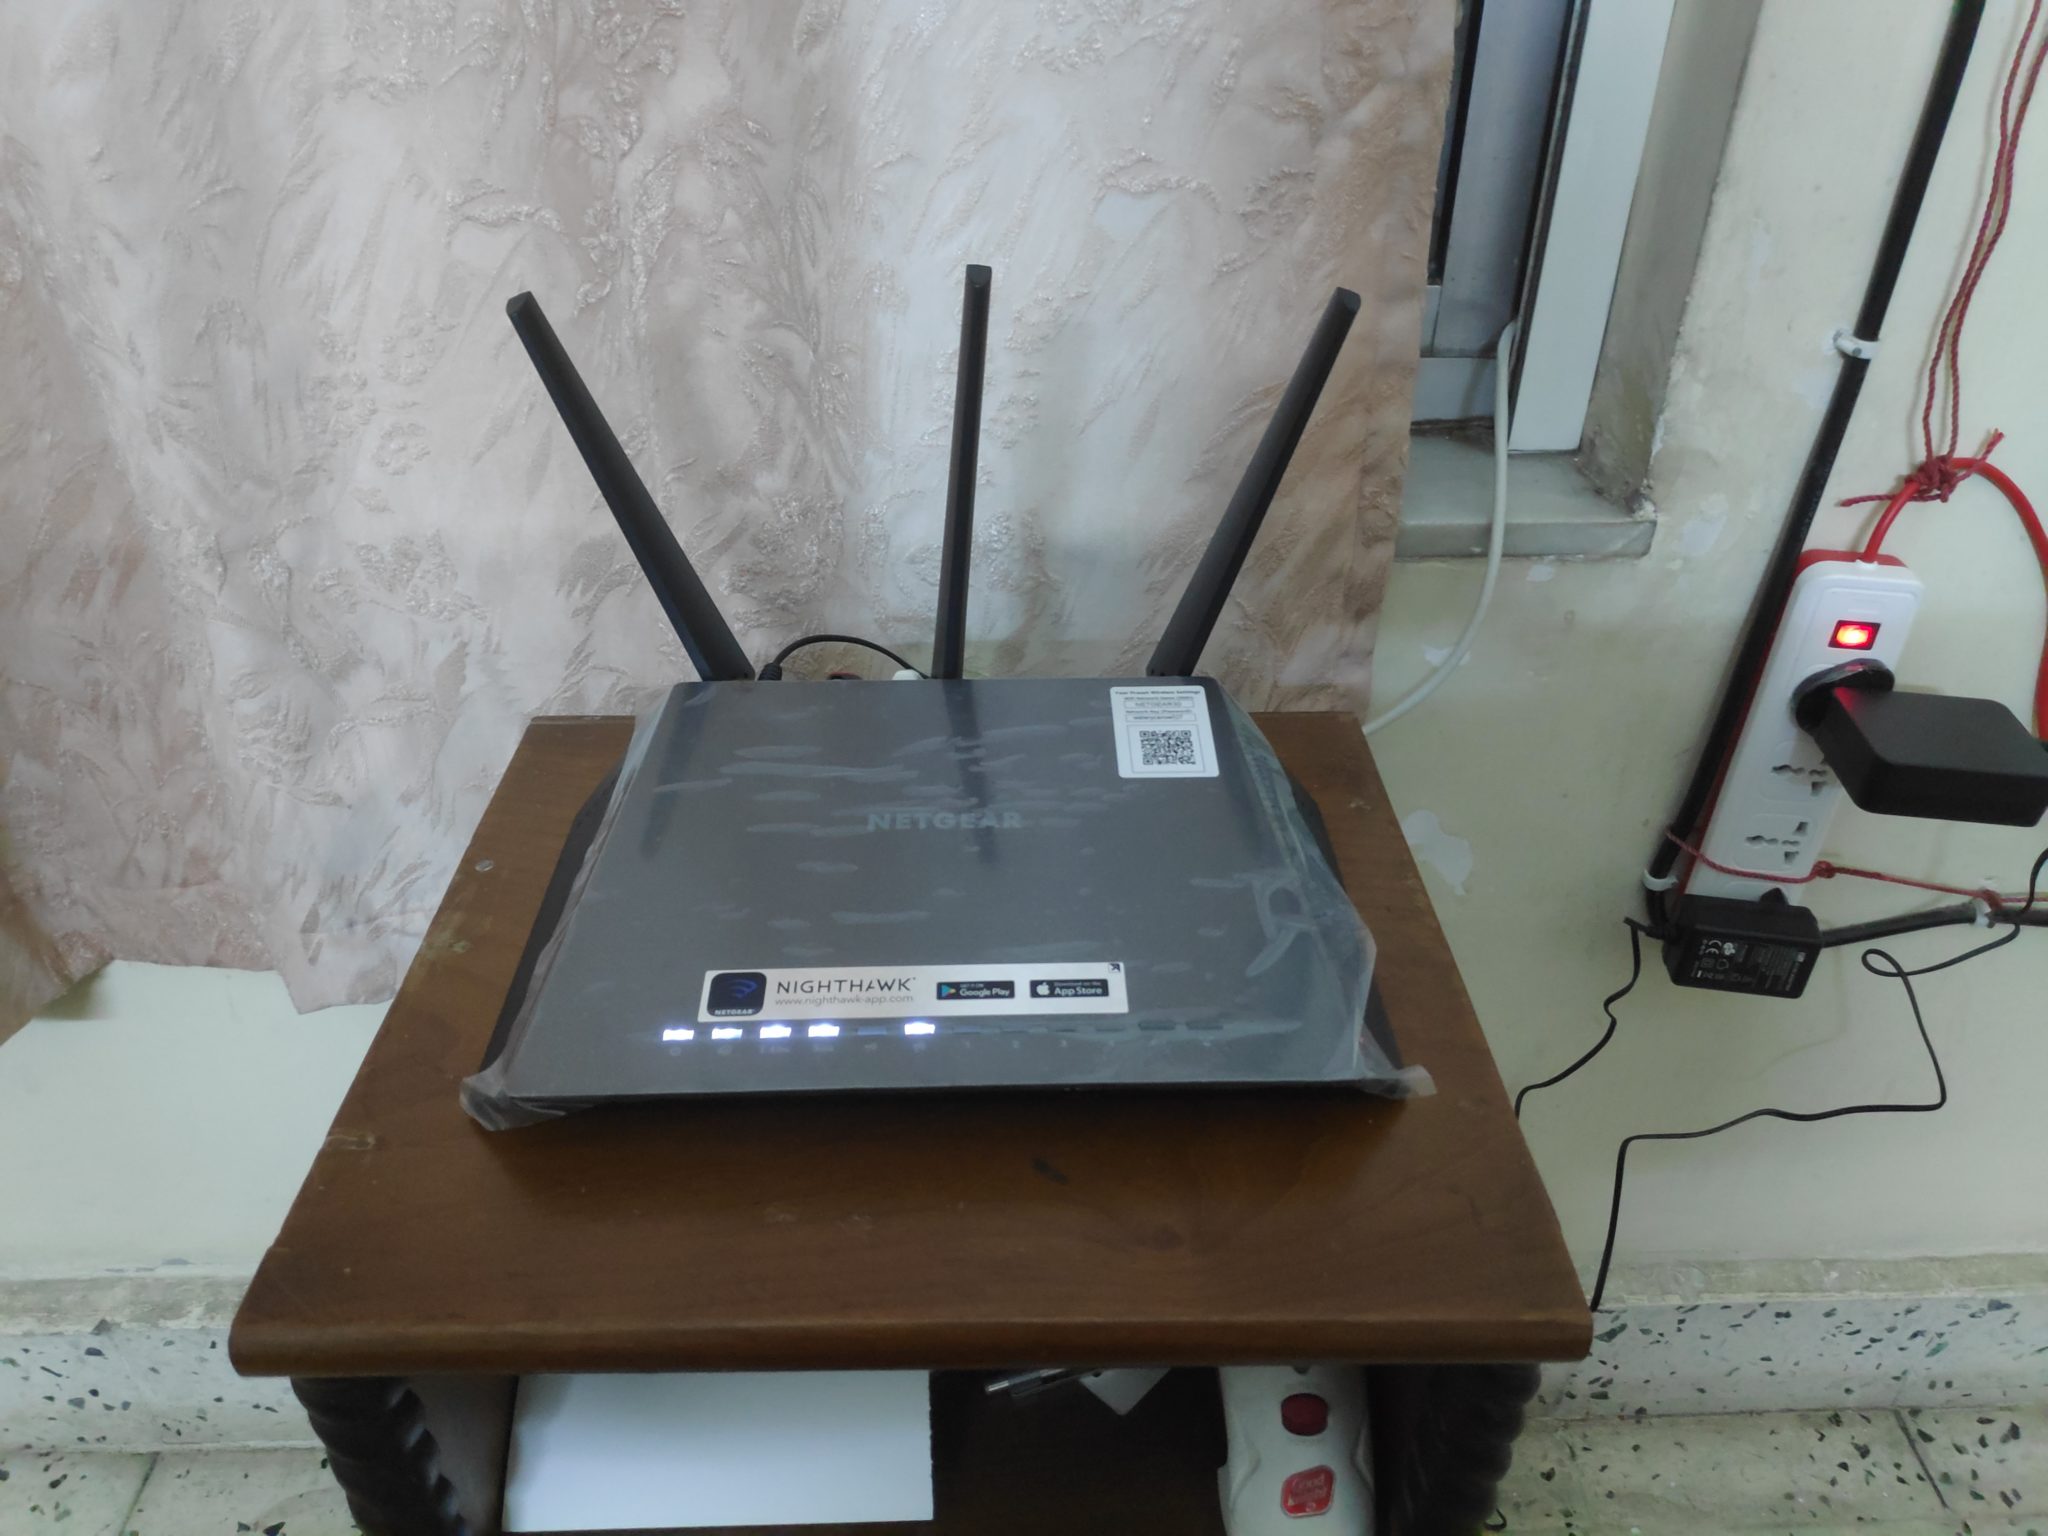 WireGuard on ASUS WiFi router with ARMv7 32bit chipset